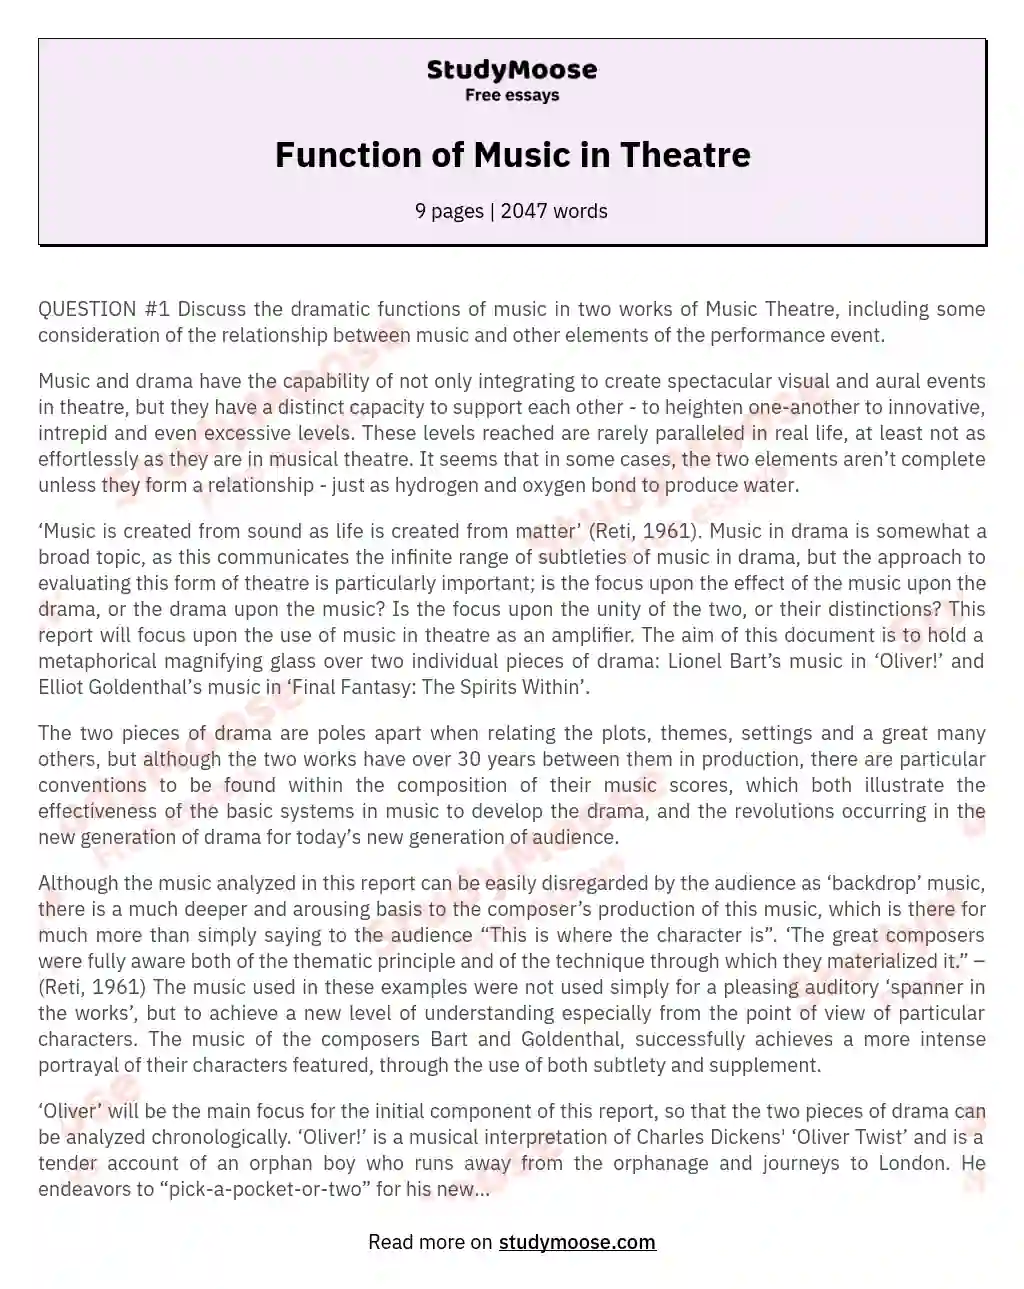 Function of Music in Theatre